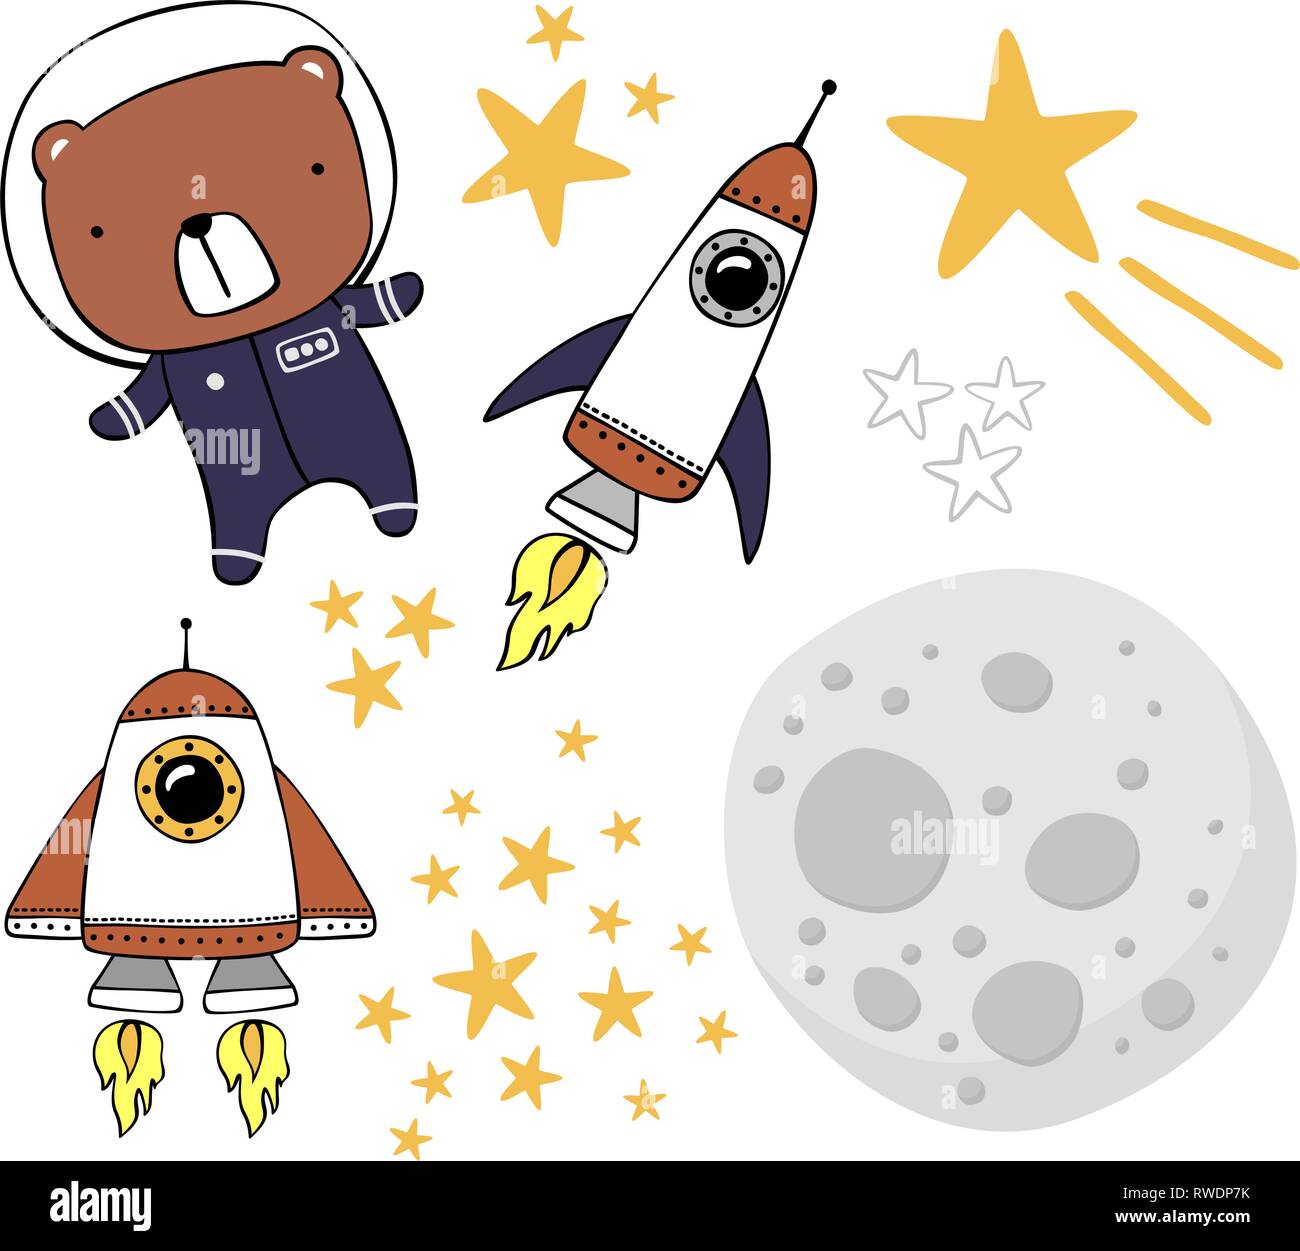 cute bear in astronaut suit with space theme design elements isolated on white. hand drawn style illustration. can be used for nursery decoration, des Stock Vector